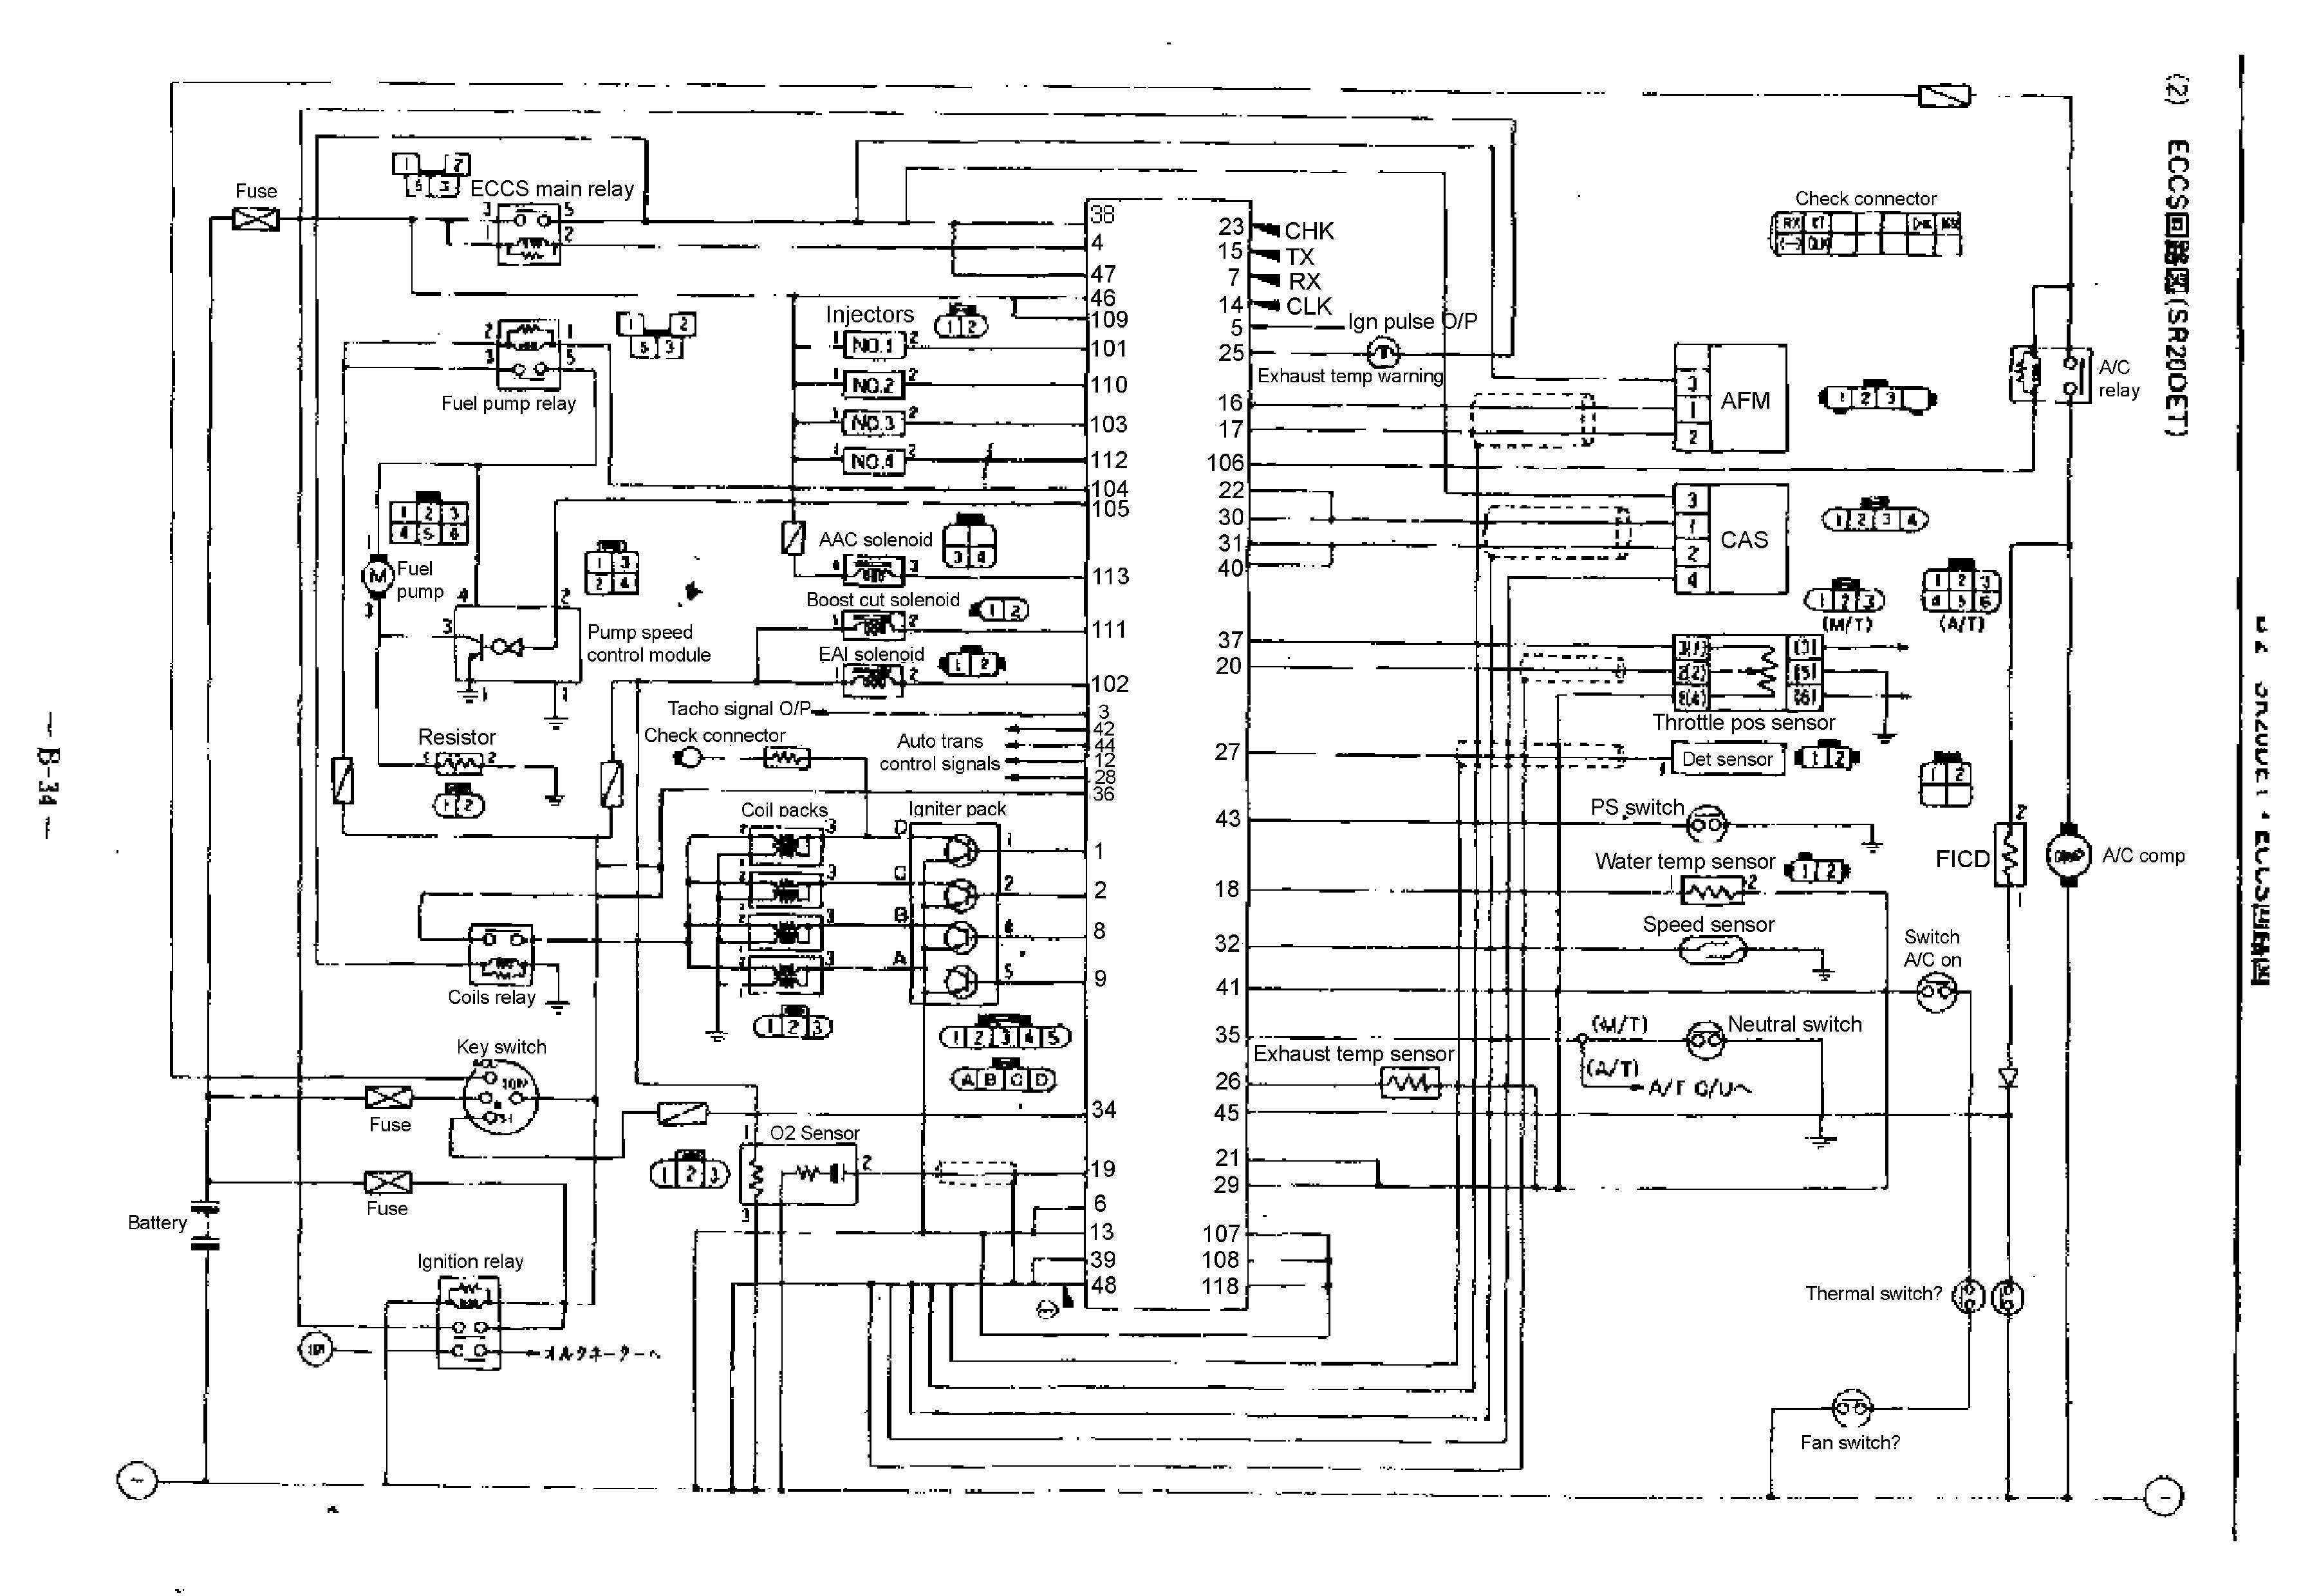 Chassis Parts Diagram Freightliner Xc Chassis Parts Diagram Awesome 2008 Blue Bird Bus Of Chassis Parts Diagram